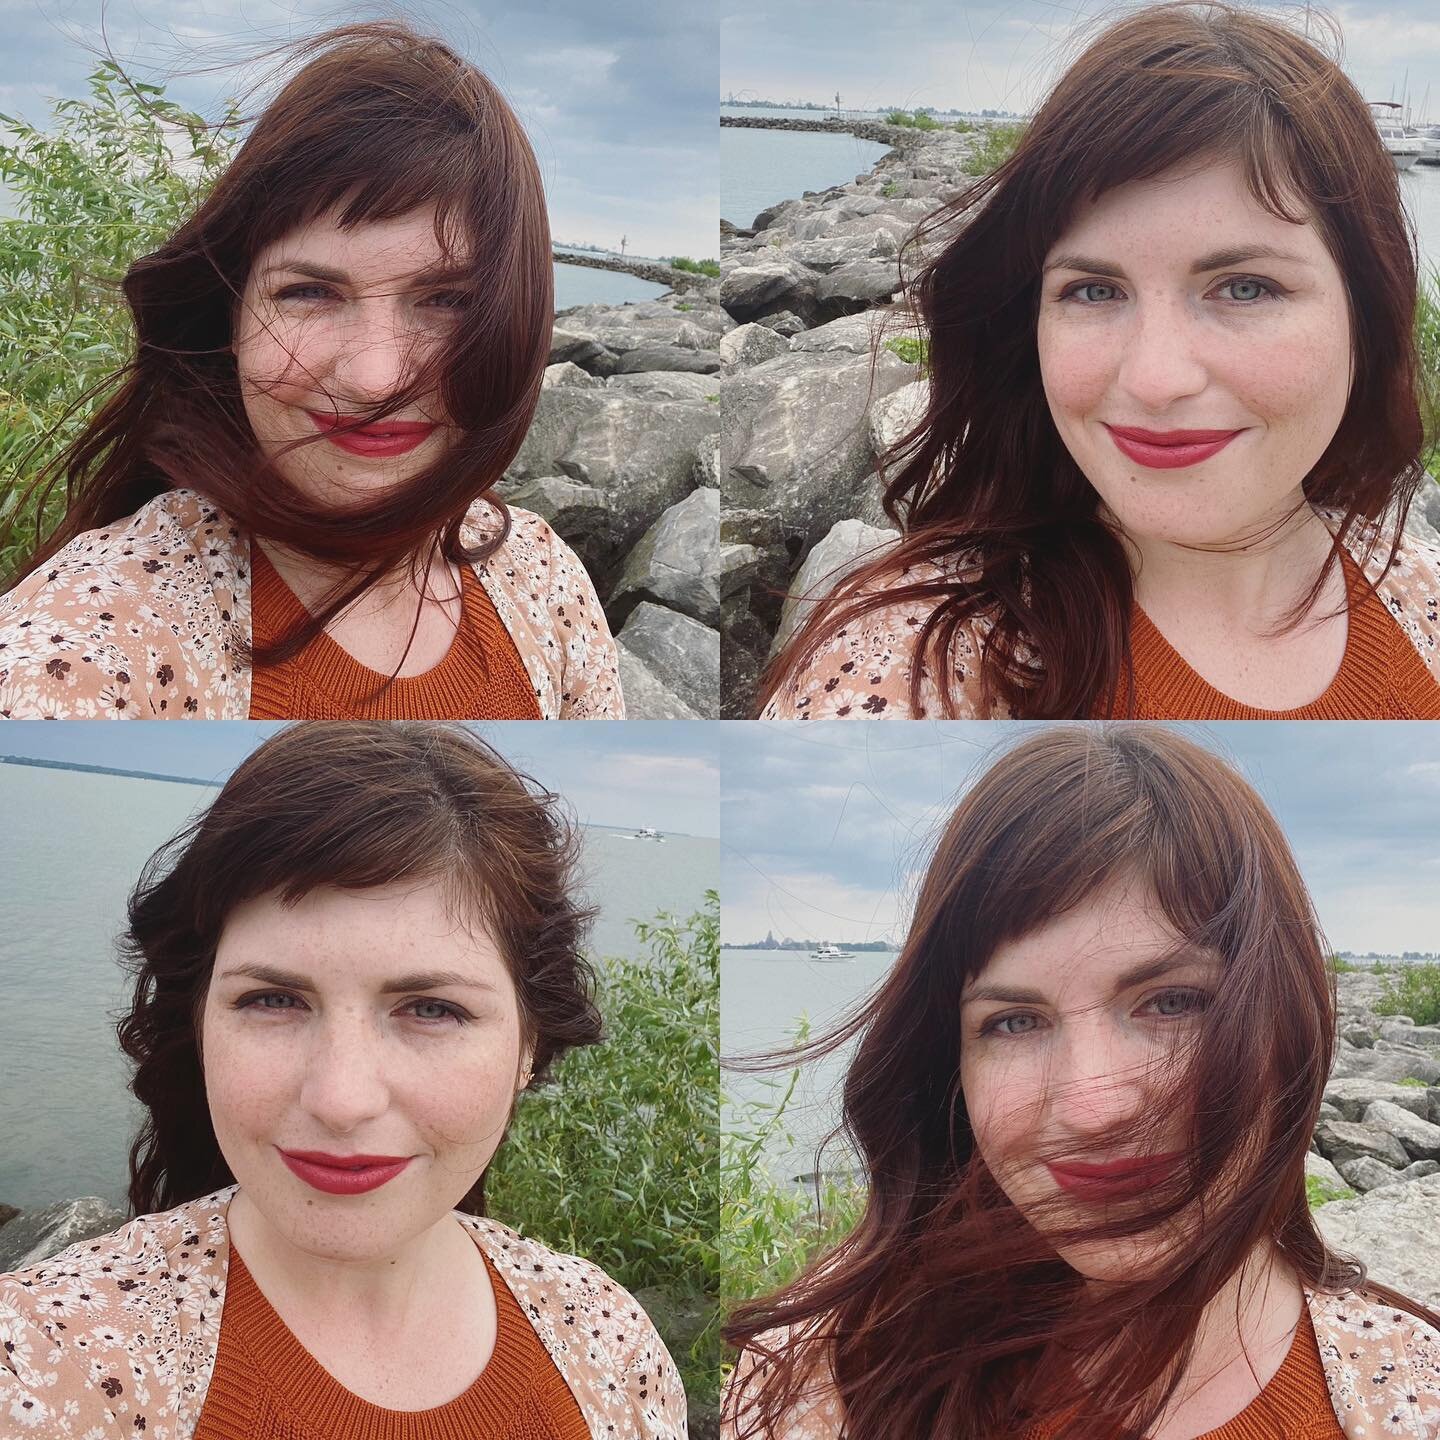 And this, my friends, is why you hire a professional to take your headshot. Nature wins this round. In other news, I made another trip around the sun! See slide 2 for birthday plans. 😎✨